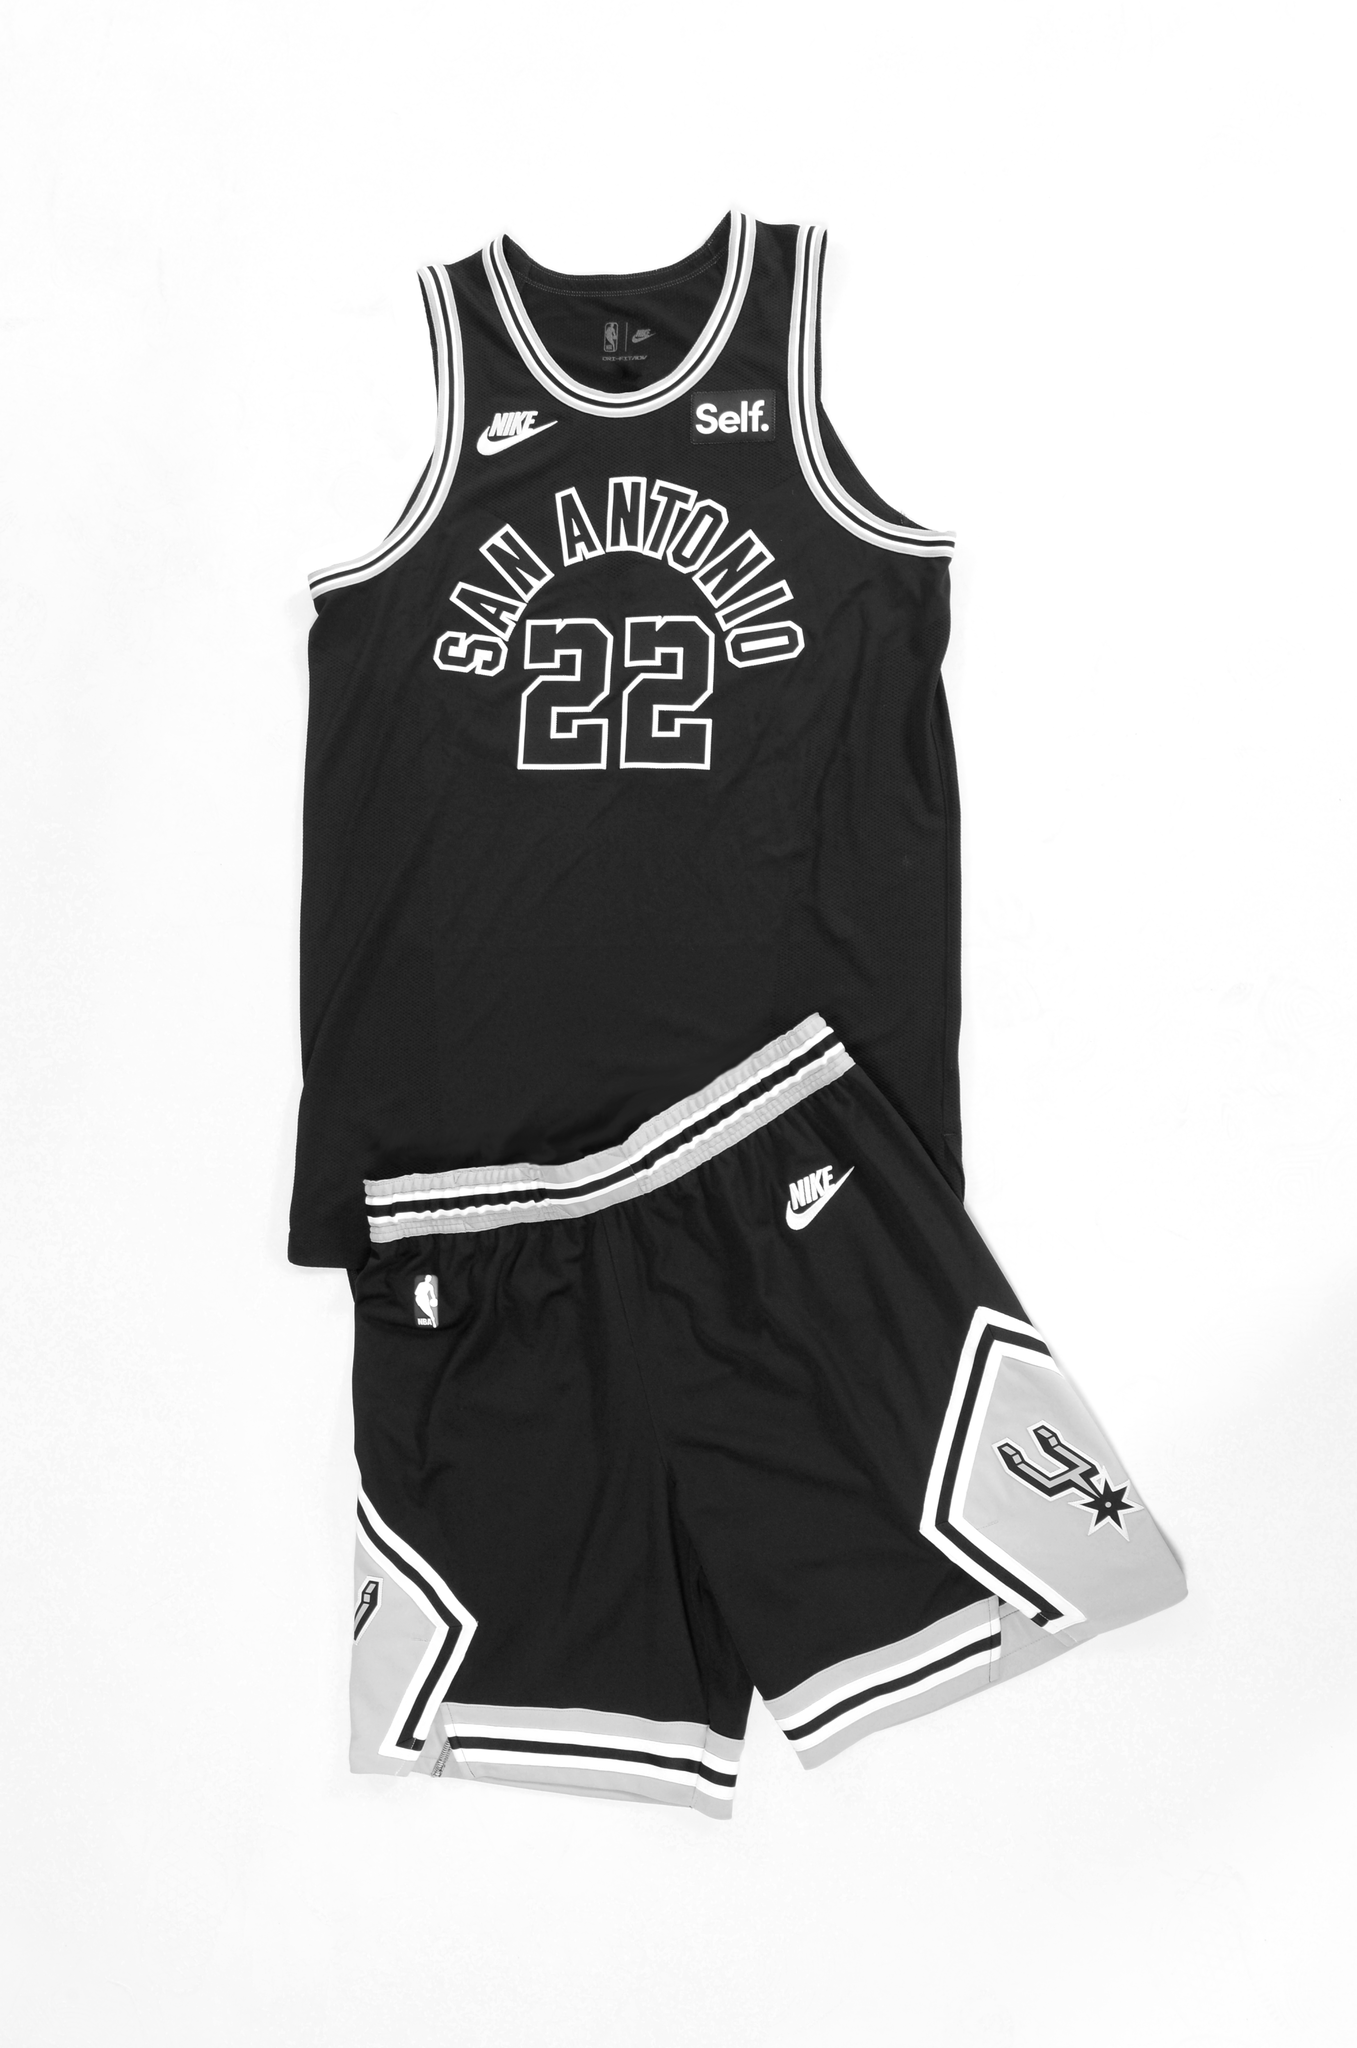 Spurs unveil iconic uniform to commemorate 50th anniversary of franchise